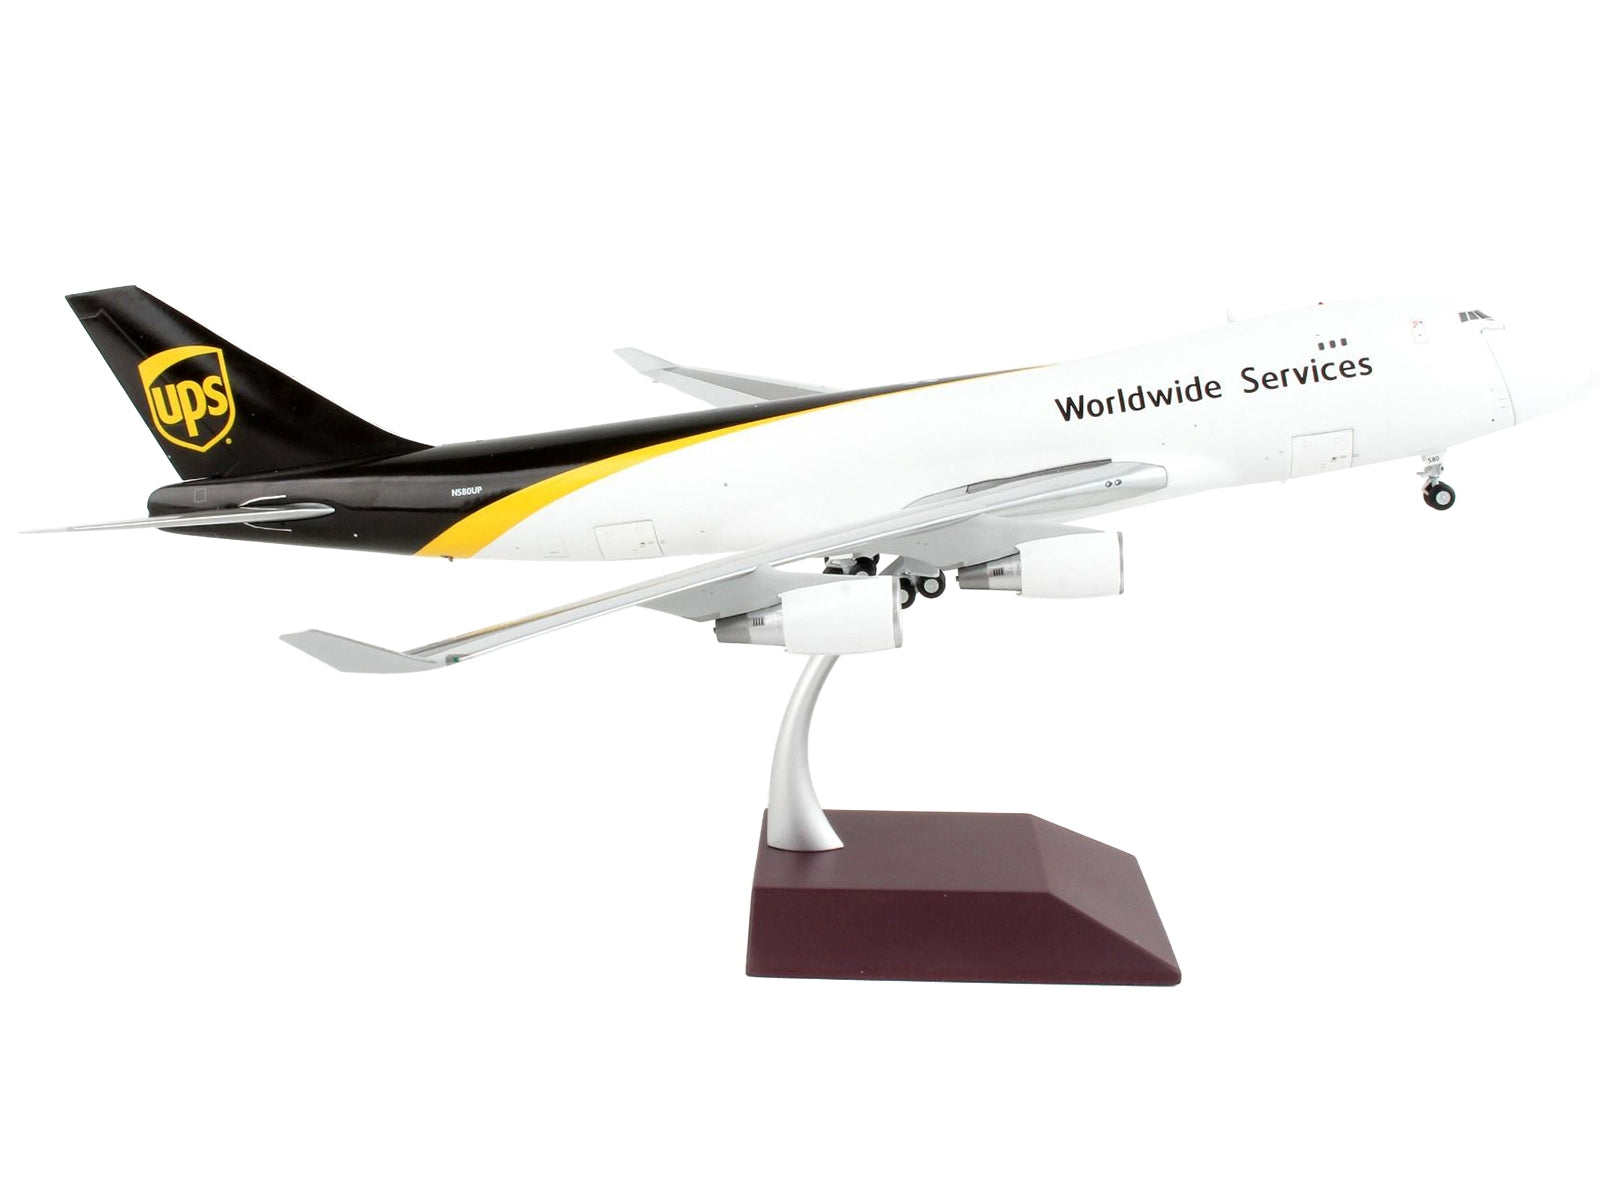 Boeing 747-400F Commercial Aircraft "UPS Worldwide Services" White with Brown Tail